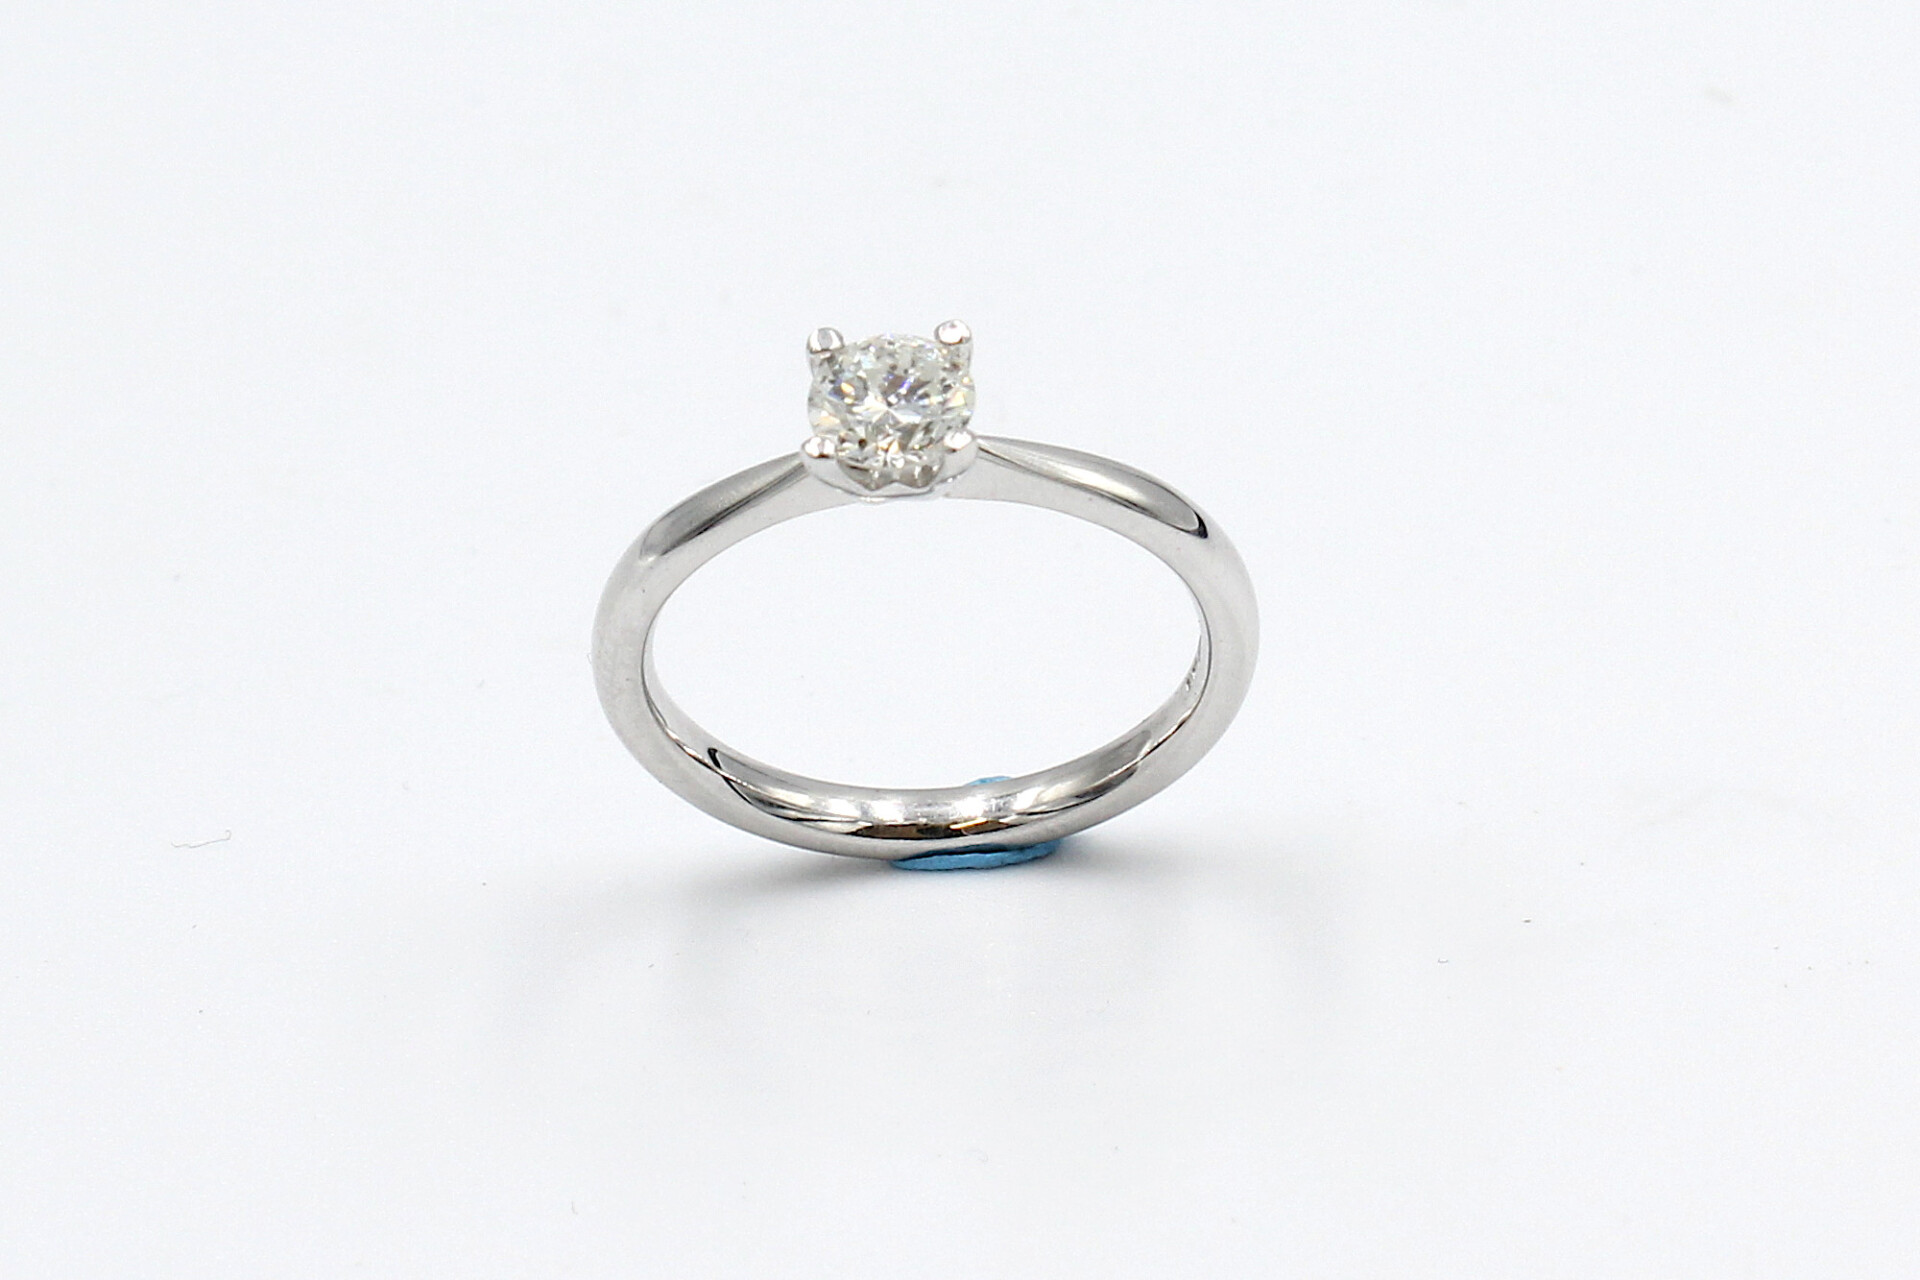 front view of a white gold diamond engagement ring